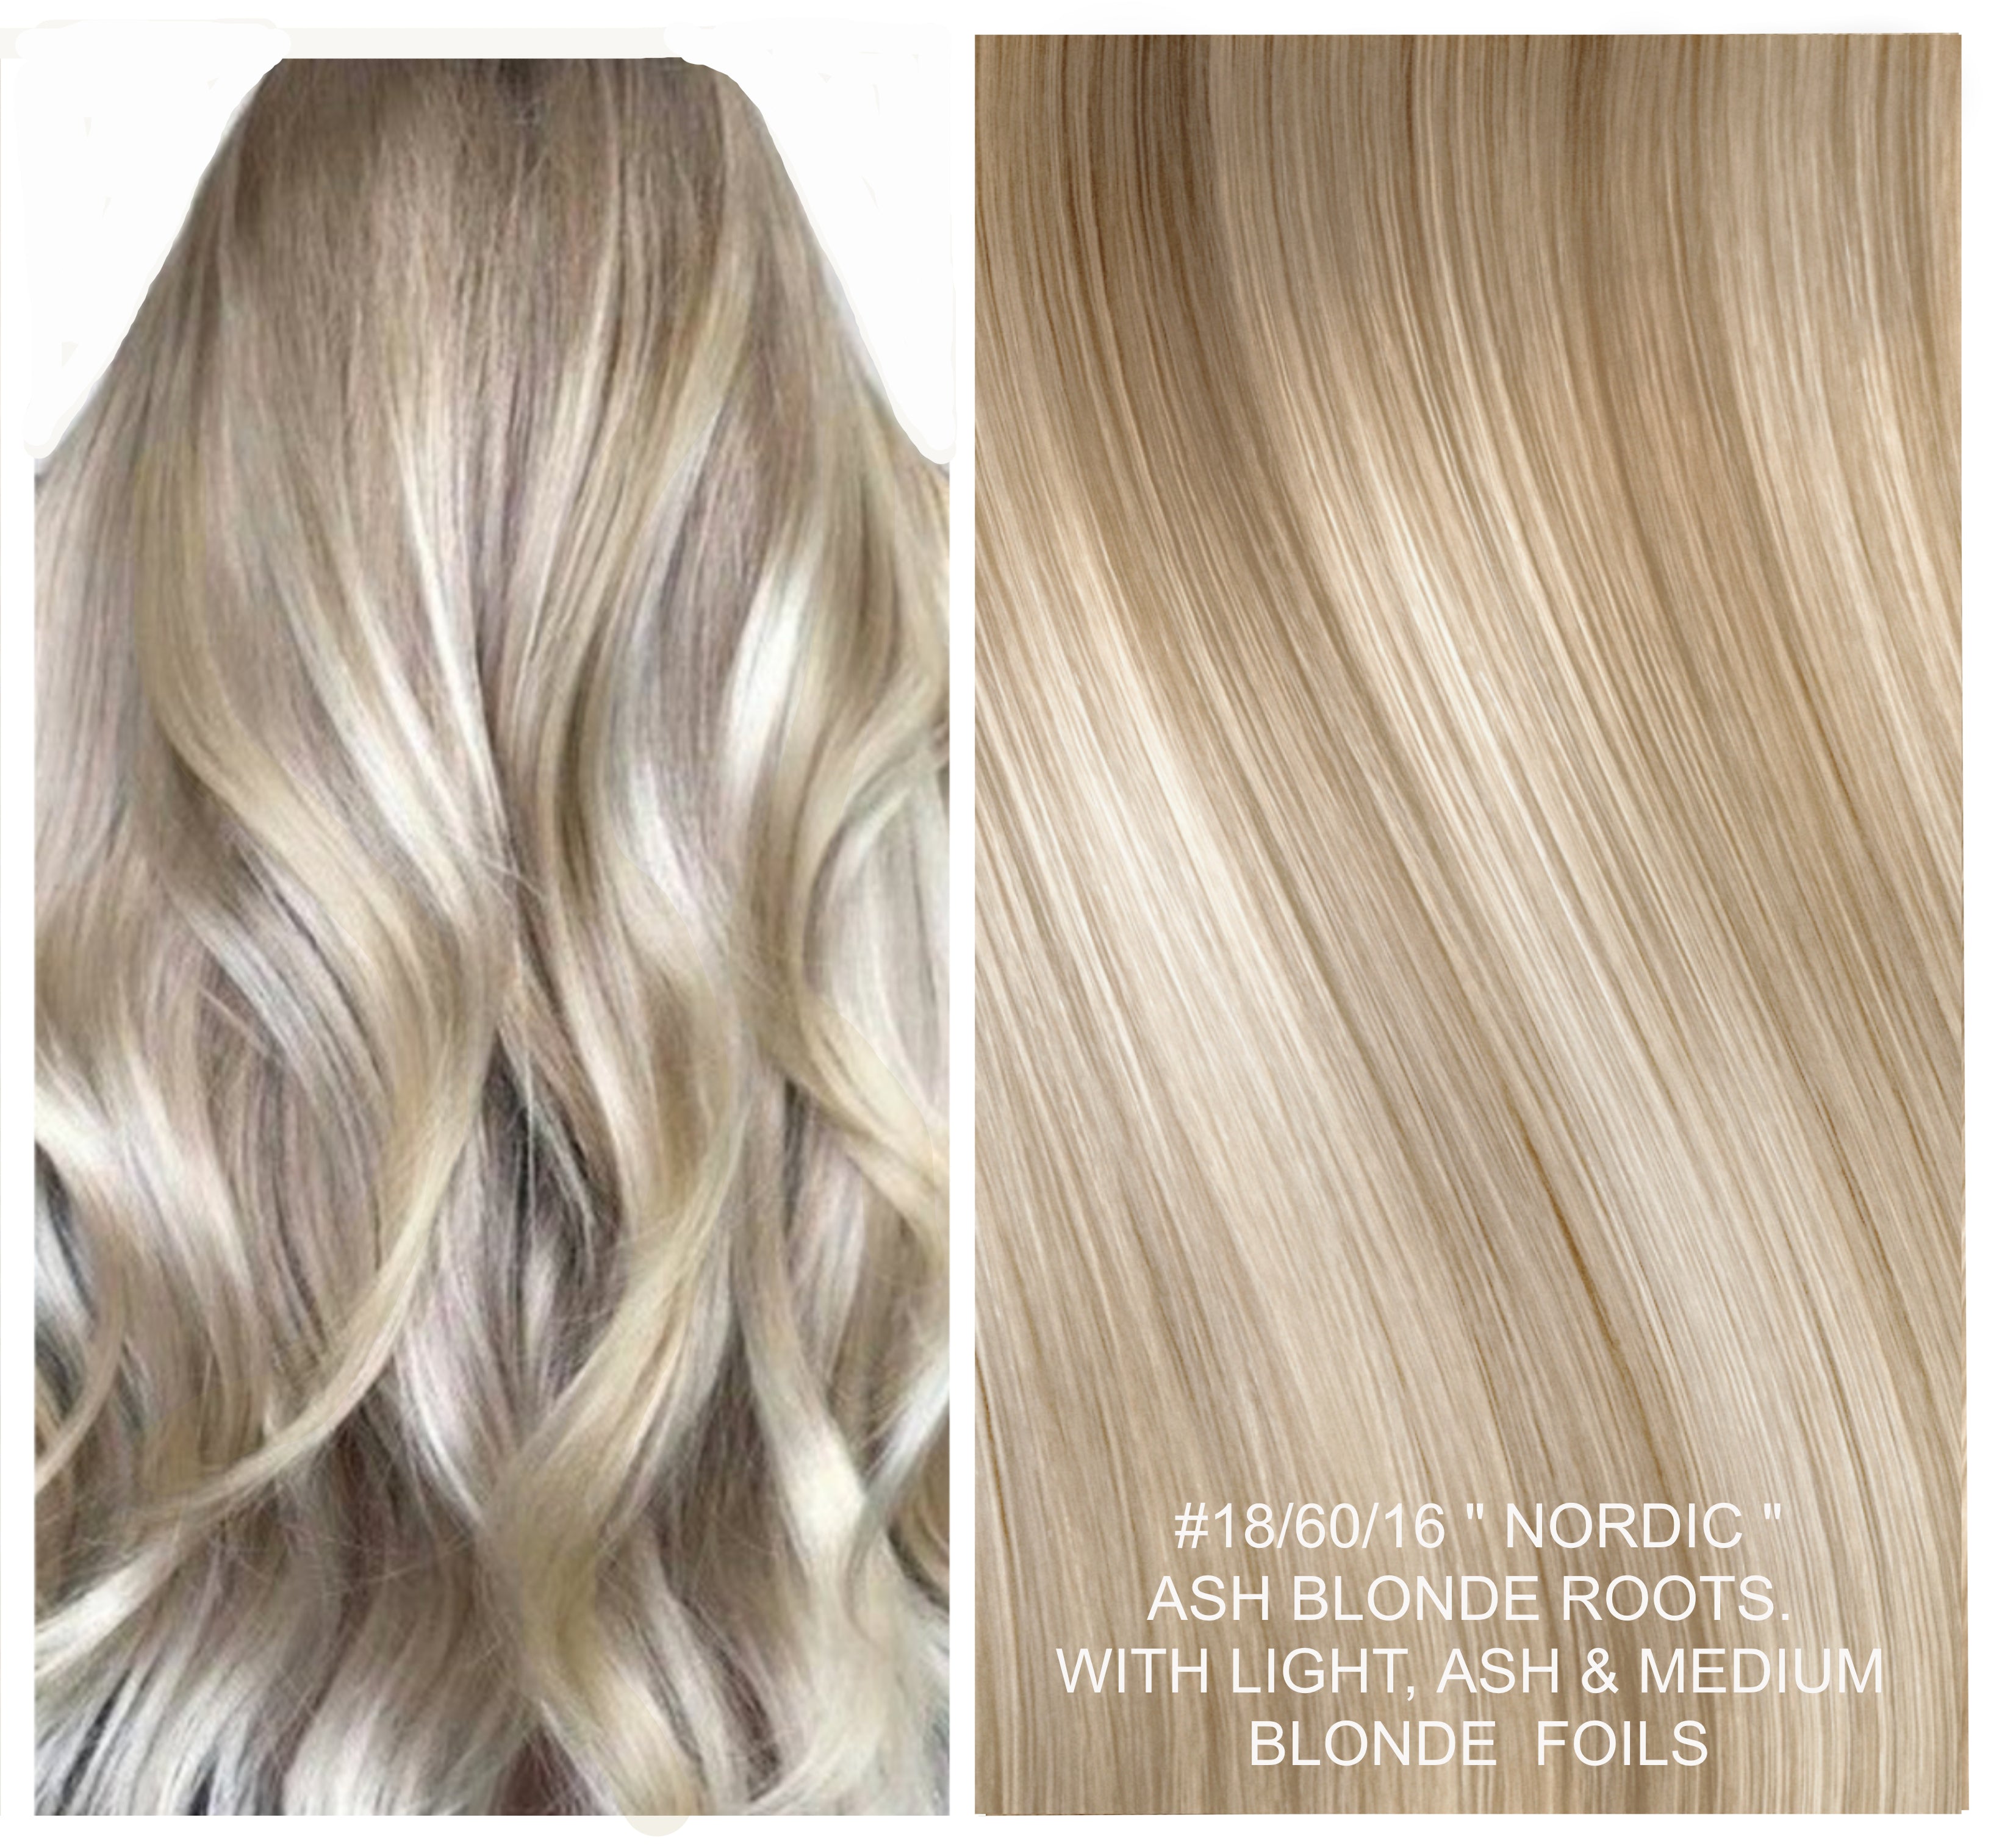 ash blonde highlight clip in Russian hair extensions 